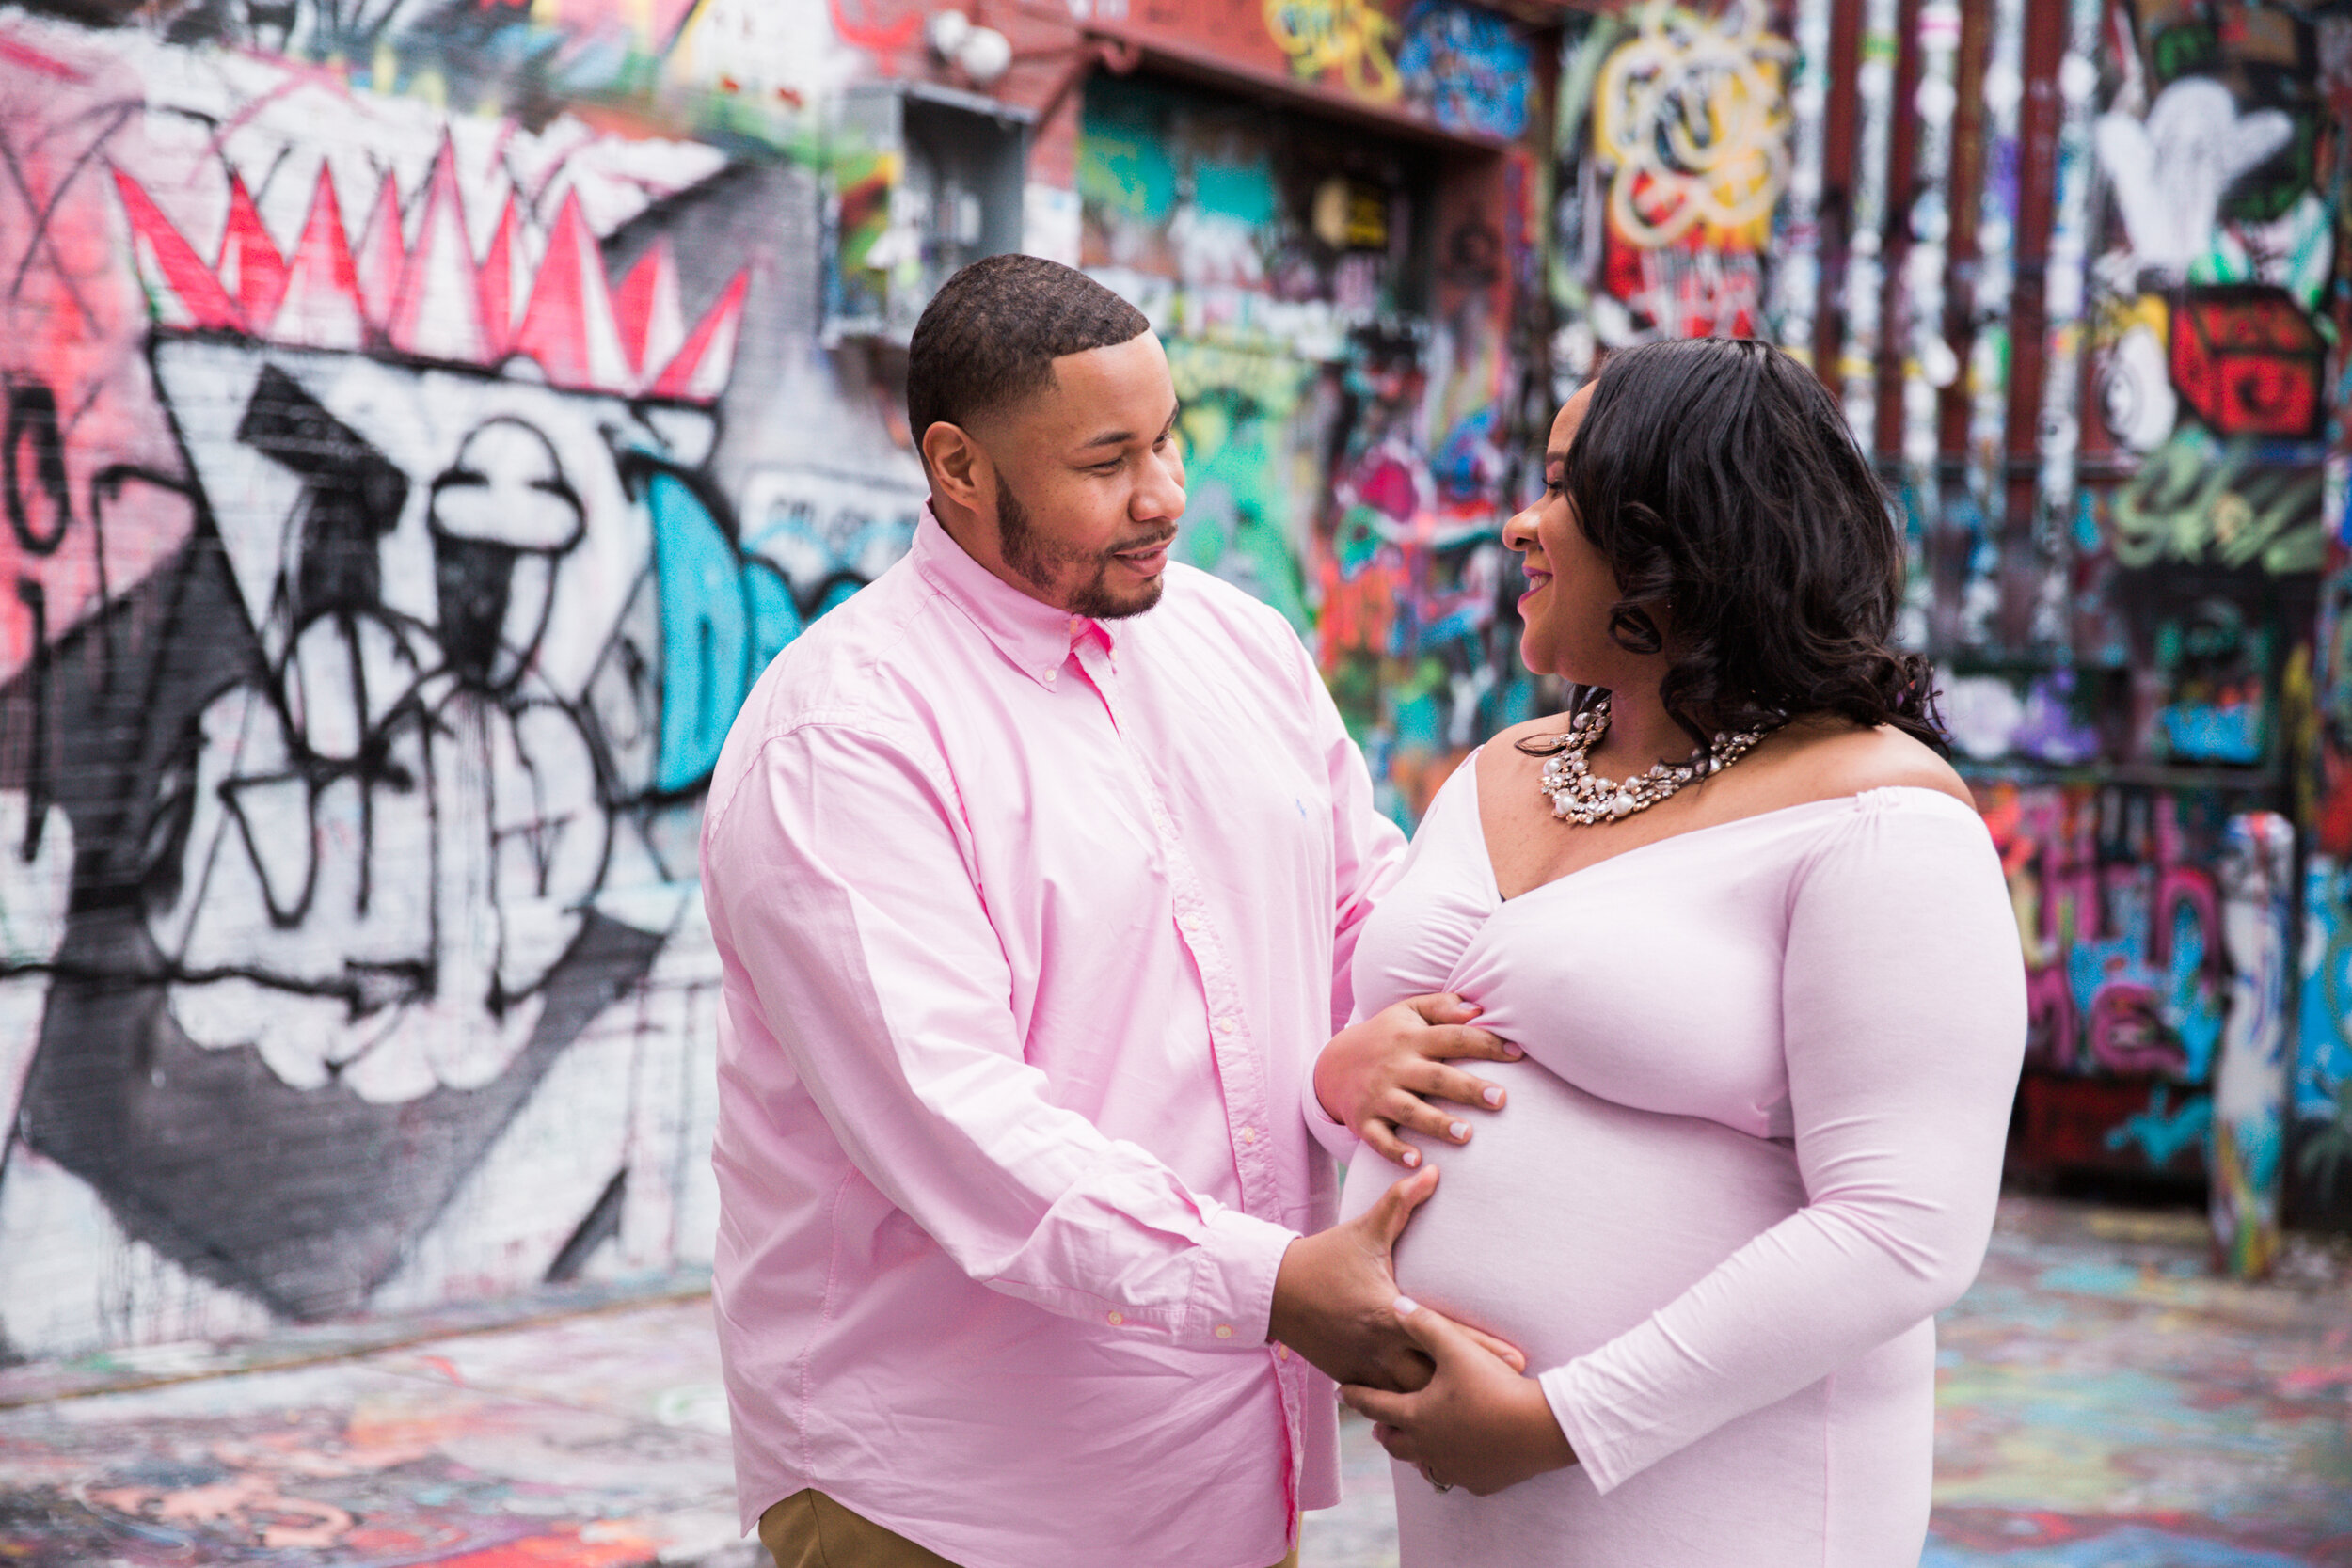 Best Maternity Photographer in Baltimore Maryland Maternity Session at Graffiti Alley in Baltimore Megapixels Media-7.jpg